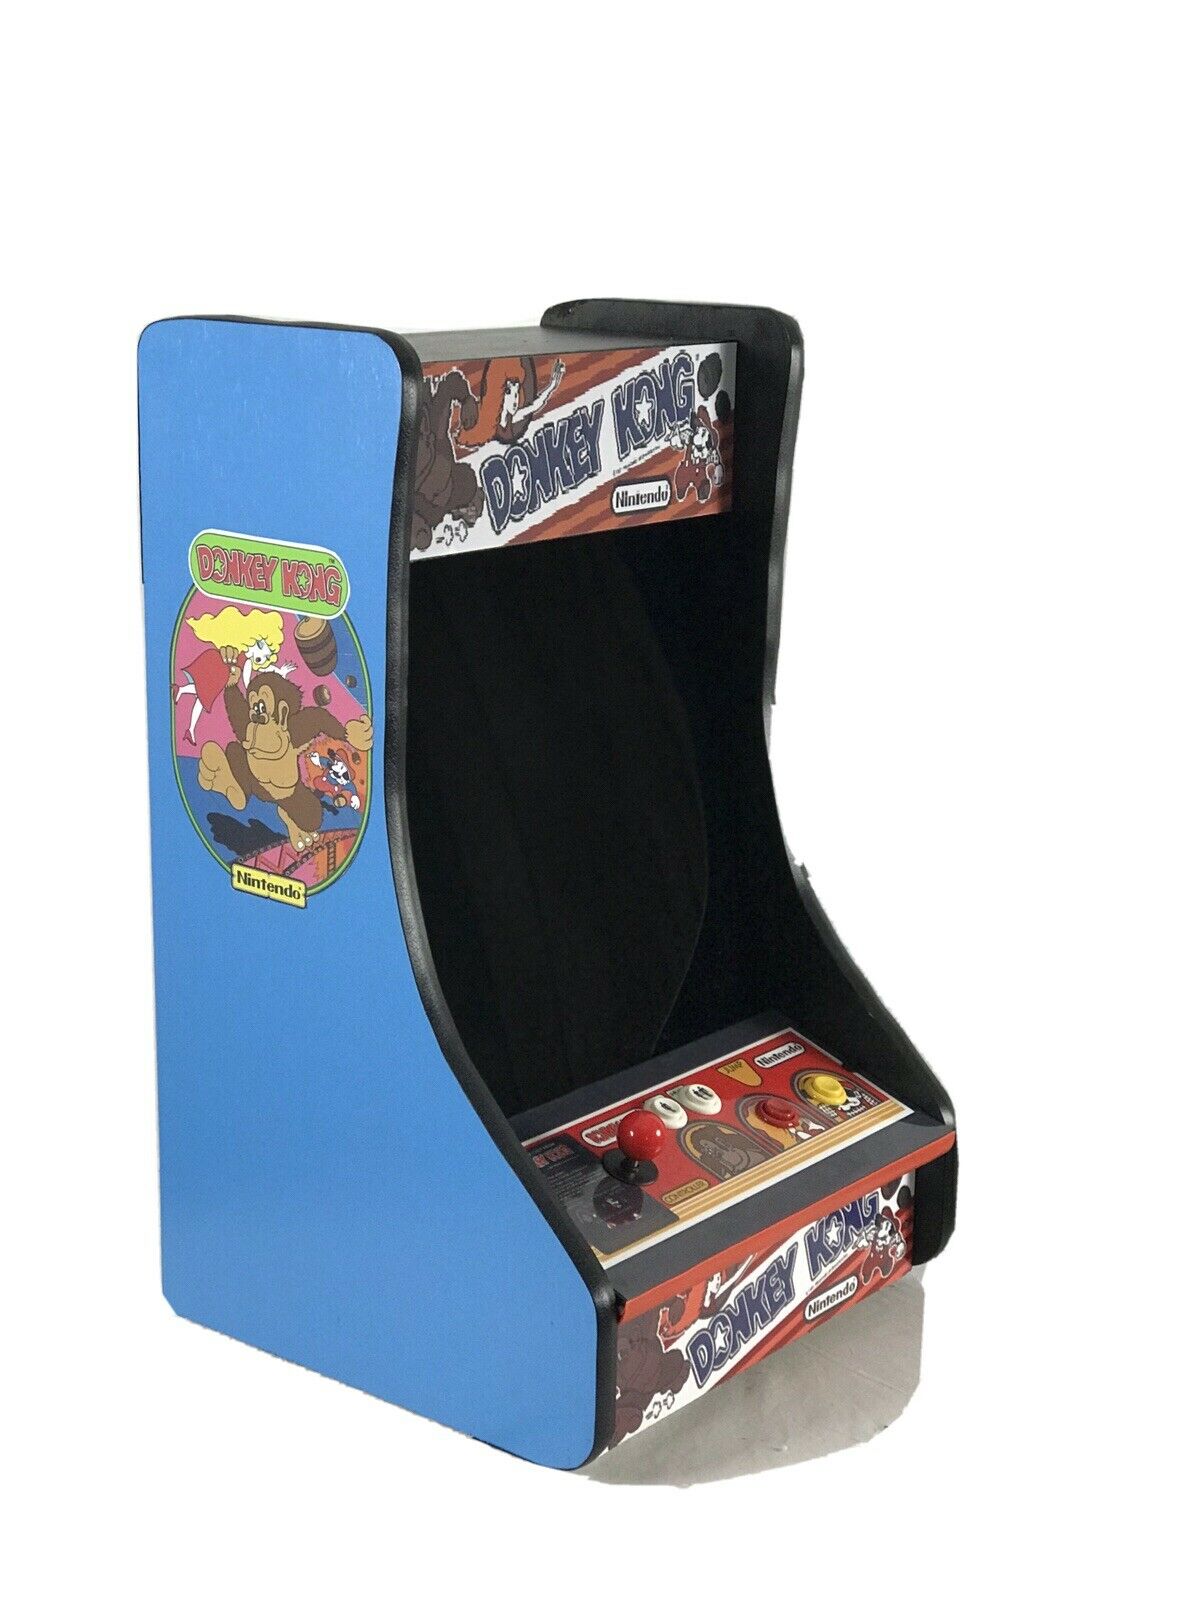 New Donkey Kong Ms. Pacman Arcade Machine Galage Upgraded 60 In 1 Tabletop 19 In